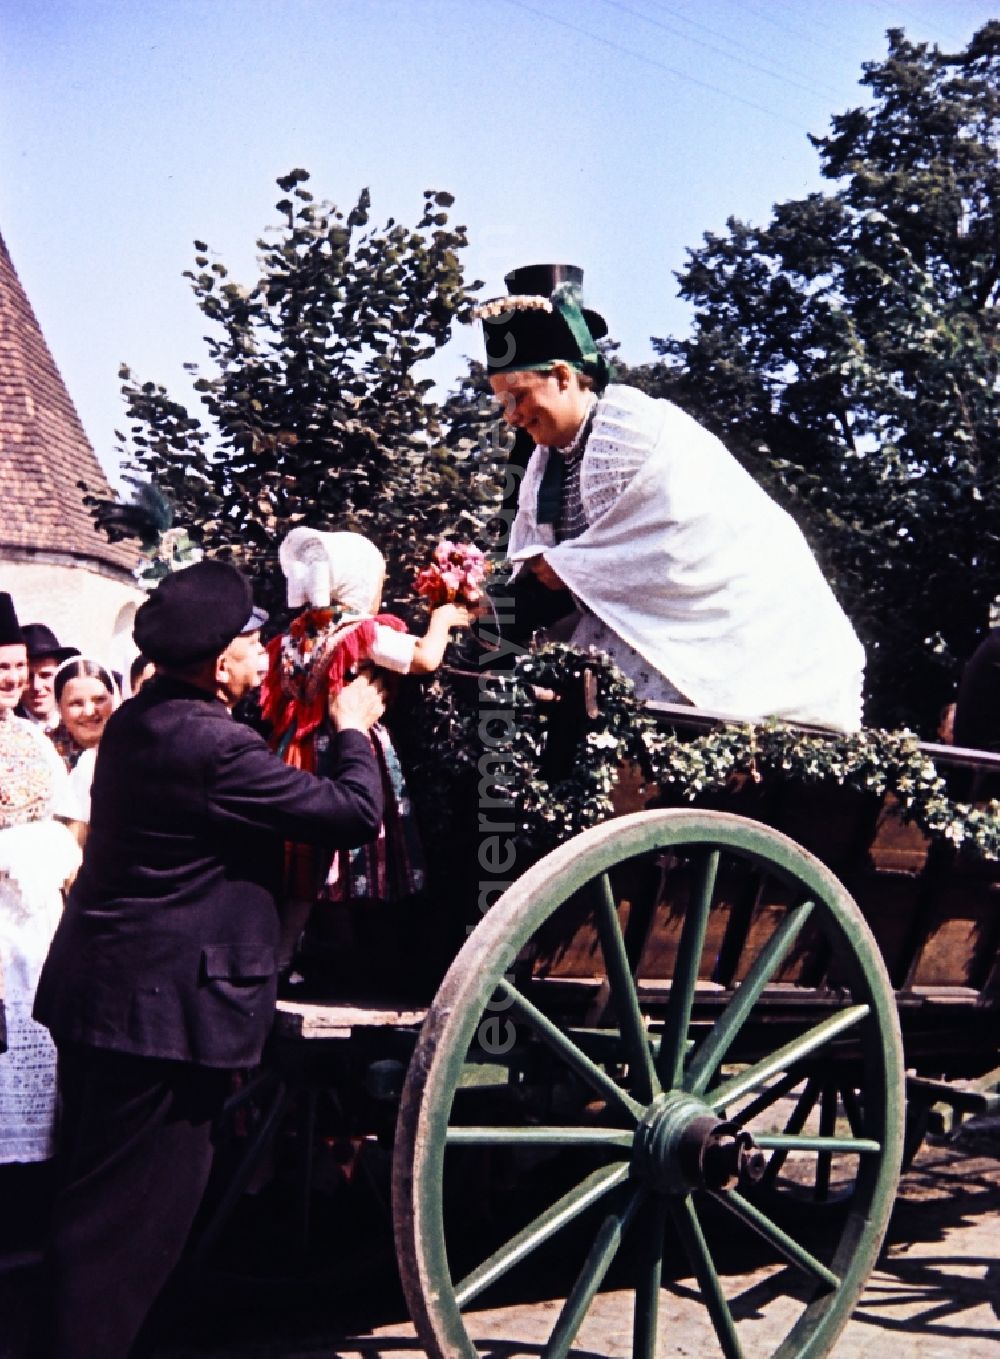 GDR photo archive: Radibor - Wedding carriage and costumes and garments the Sorbian minority in Milkel in the state Saxony on the territory of the former GDR, German Democratic Republic